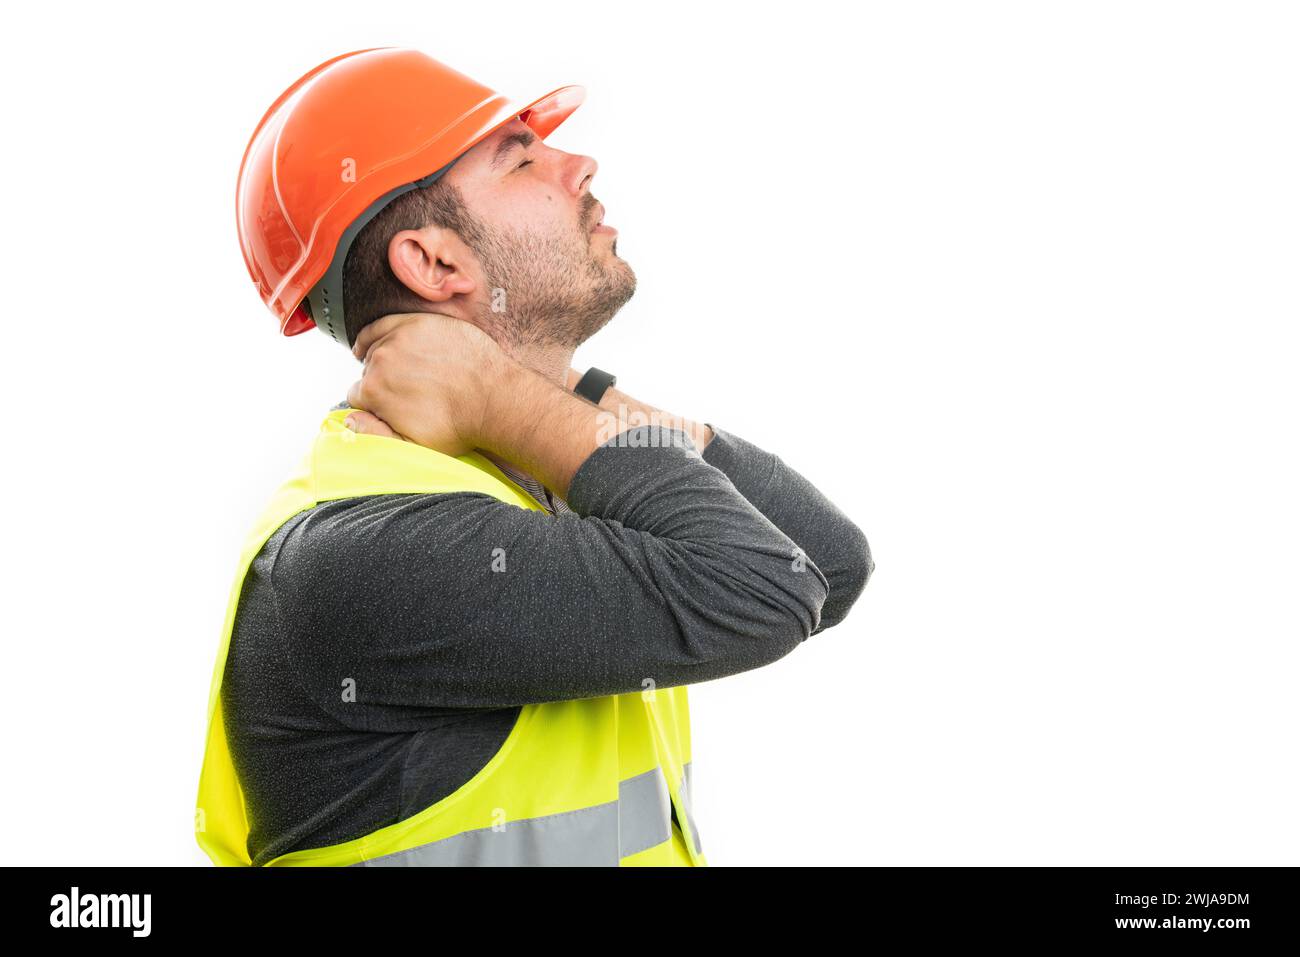 Male builder in pain touching hurting back of neck as muscle strain concept in work attire helmet and vest isolated on white studio background Stock Photo